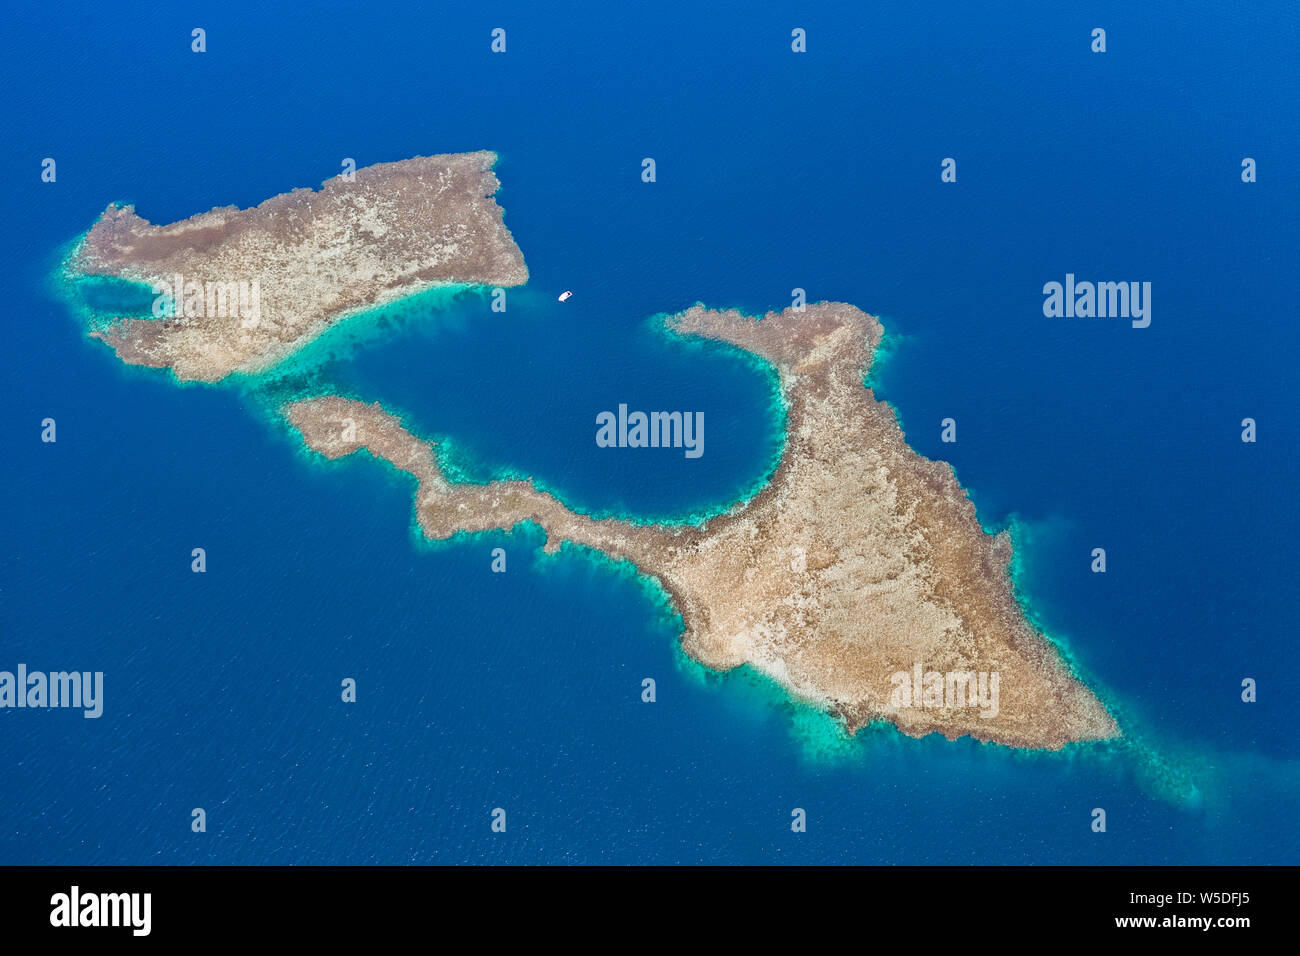 Aerial View of Islands of Kimbe Bay, New Britain, Papua New Guinea Stock Photo